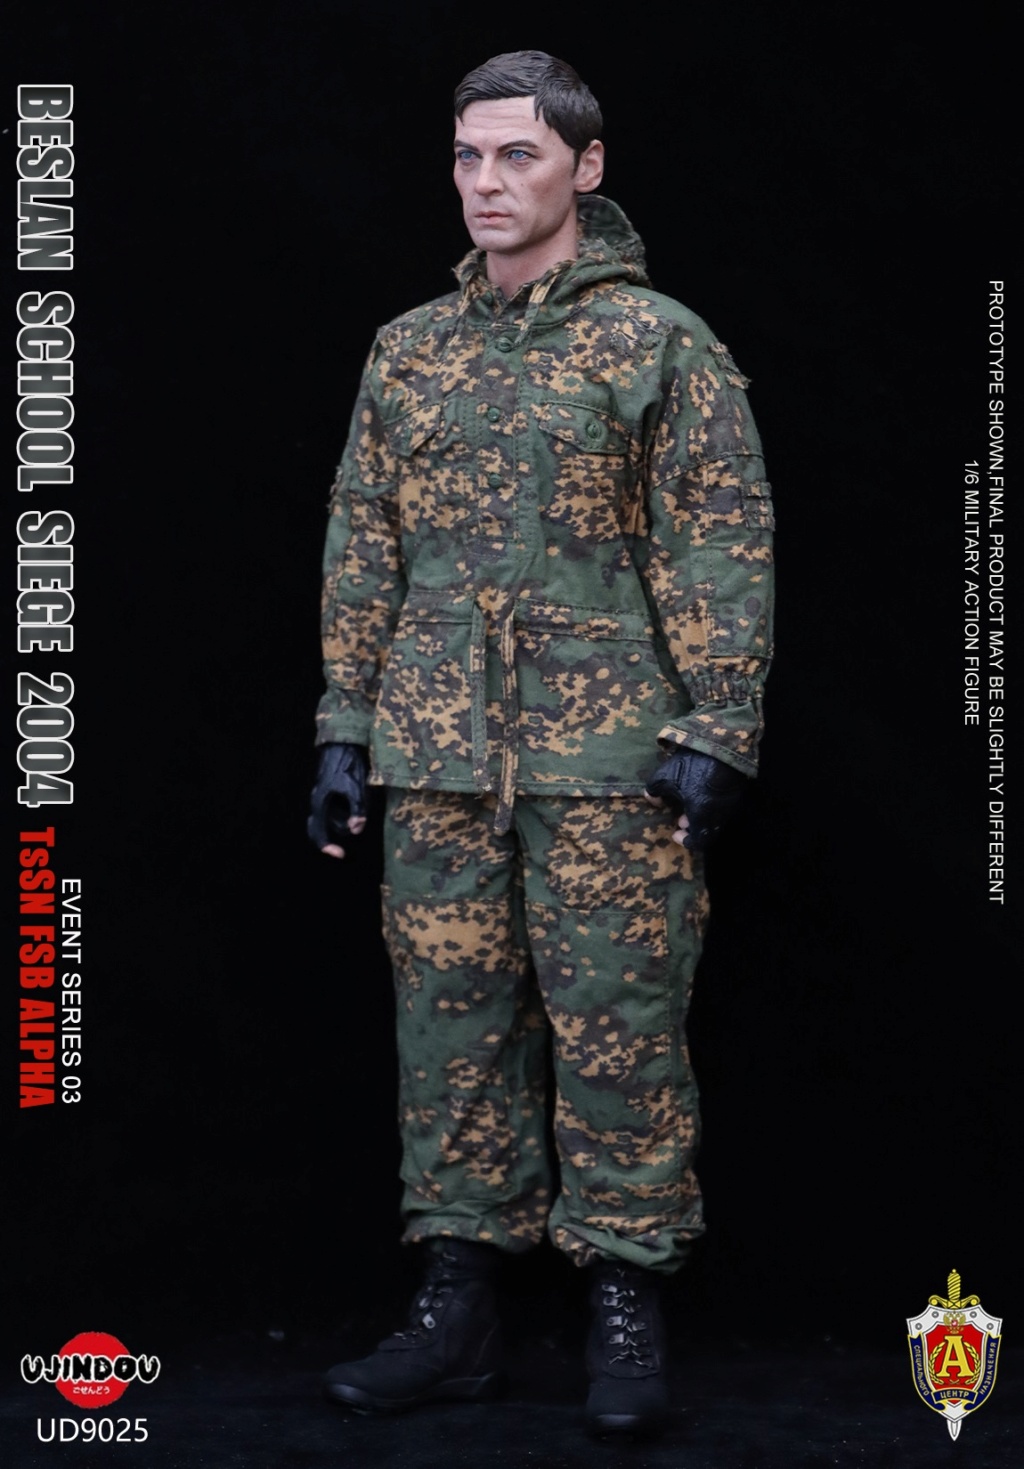 ujindou - NEW PRODUCT: UJINDOU: 1/6 FSB Special Forces of the Russian Federal Security Service - Beslan Incident 2004 #UD9025 11141510